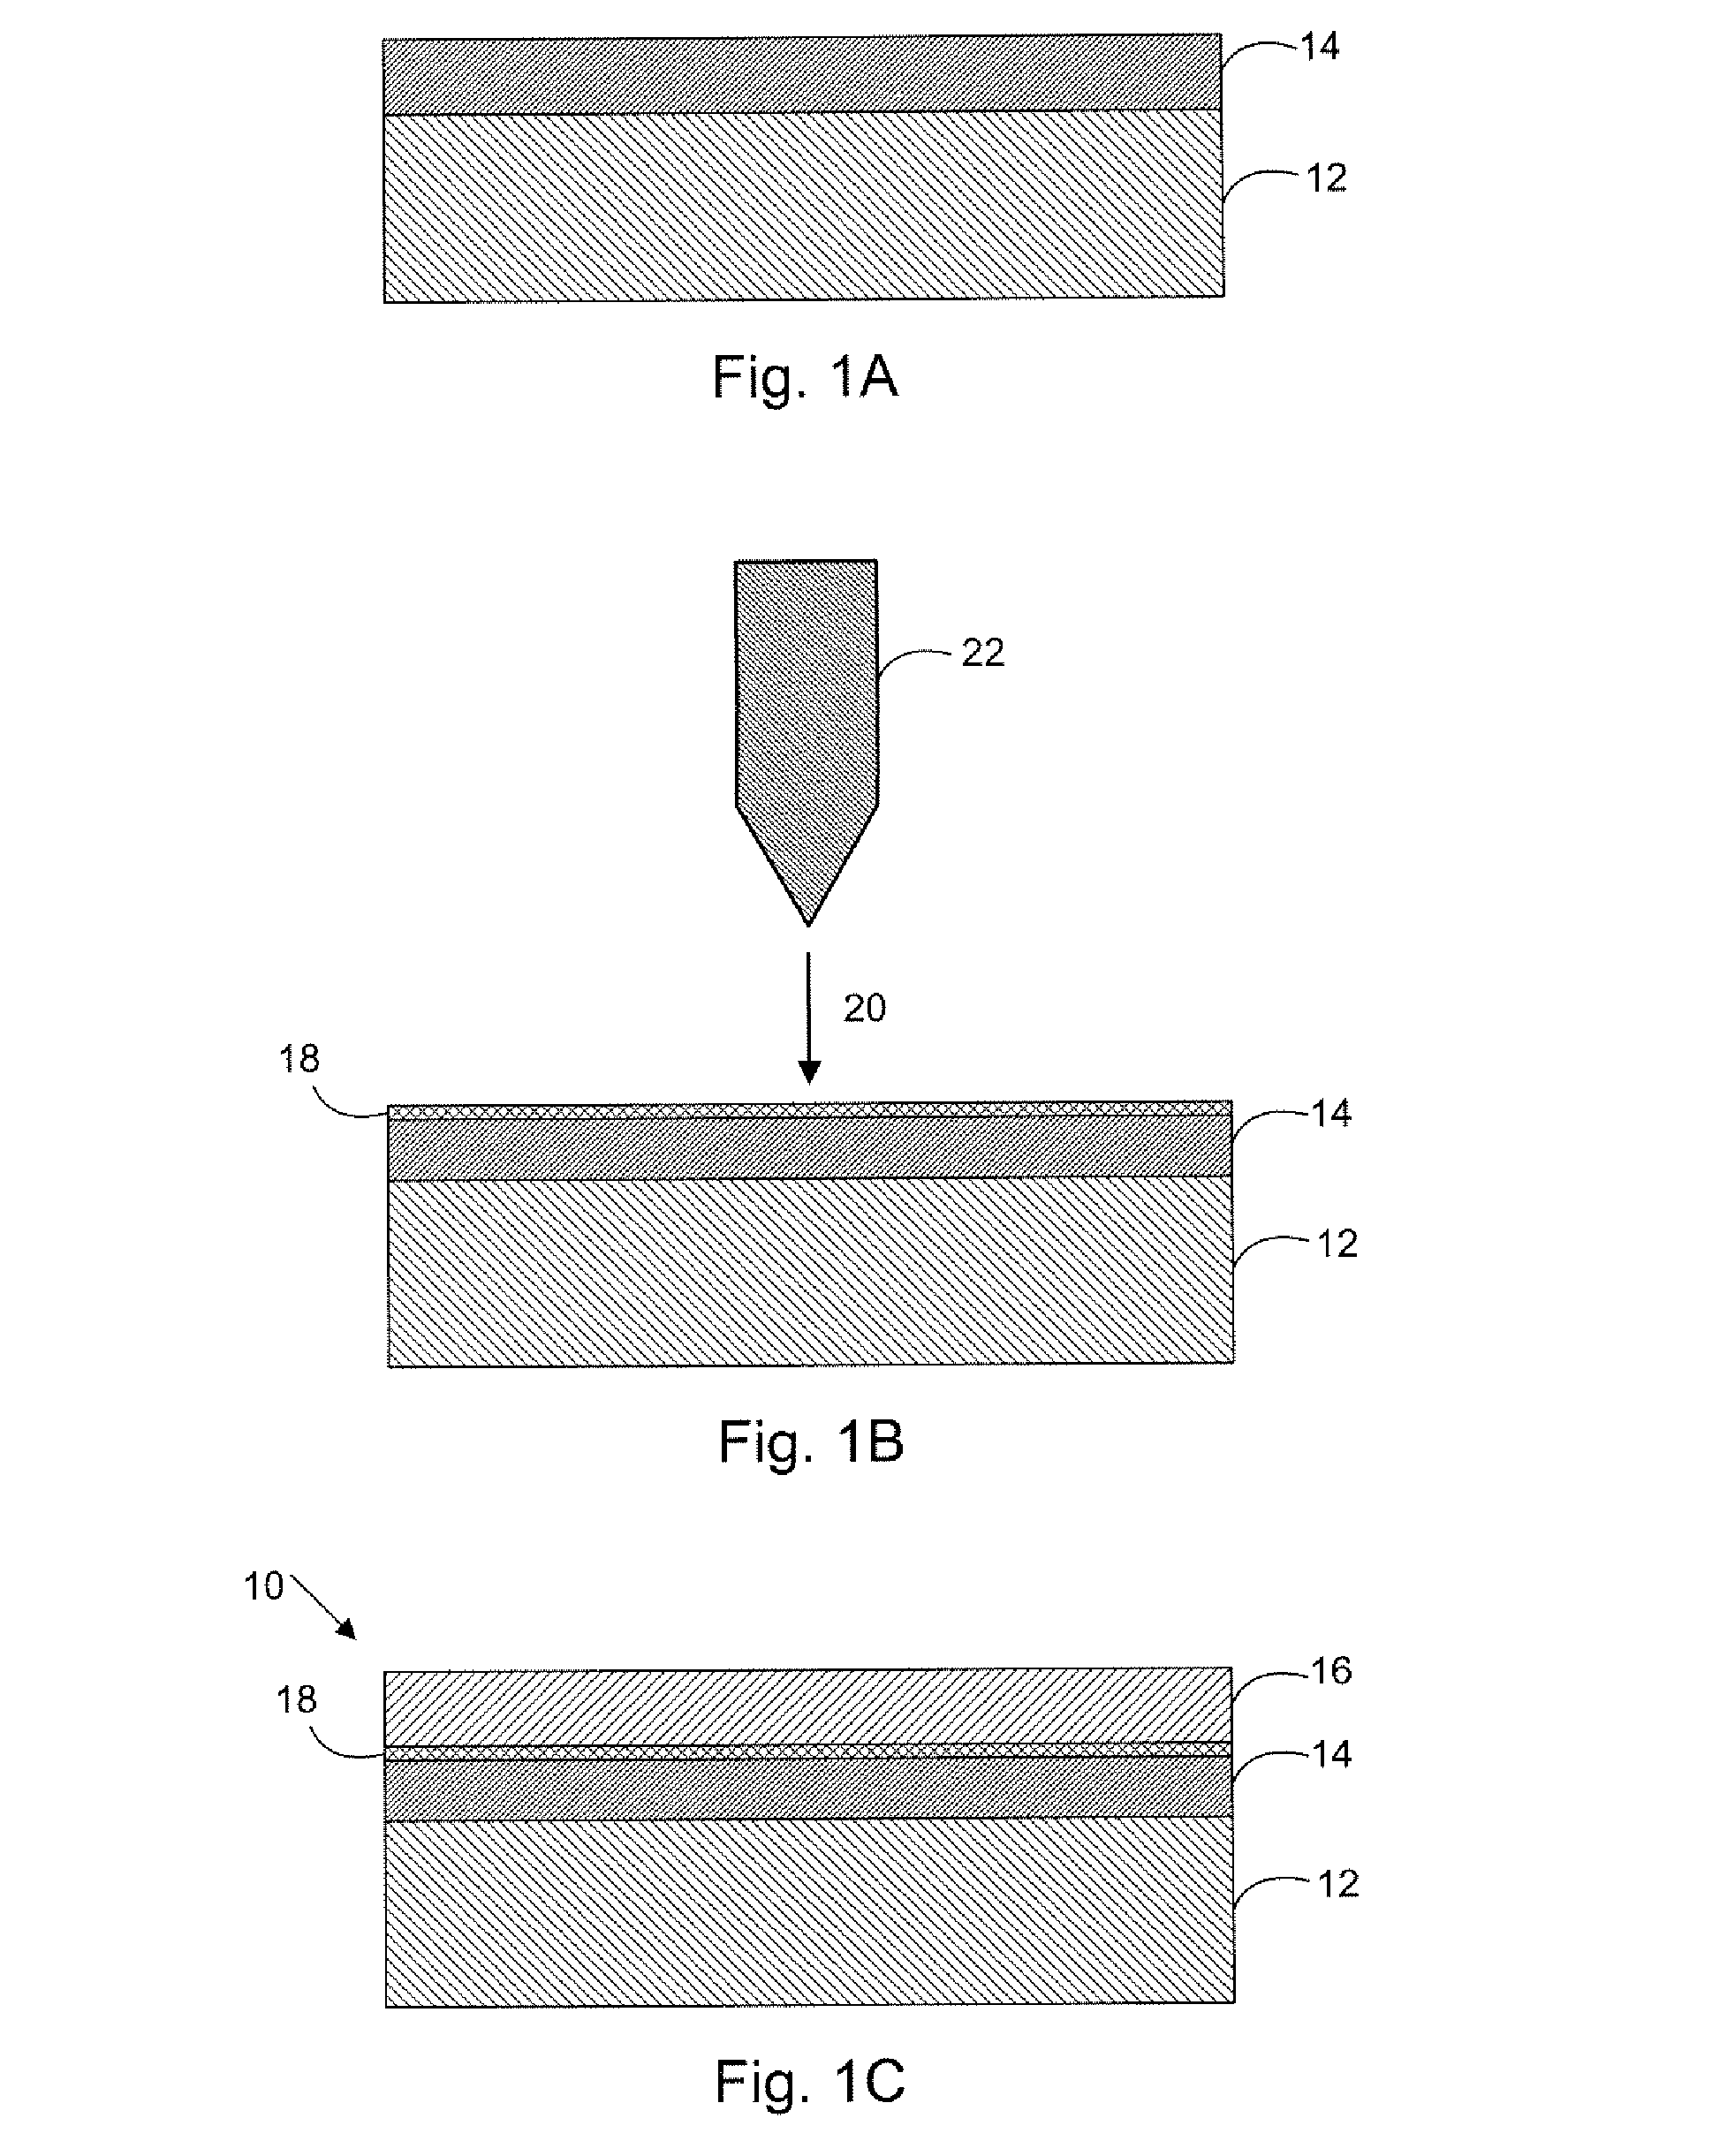 Method for forming a protective coating with enhanced adhesion between layers